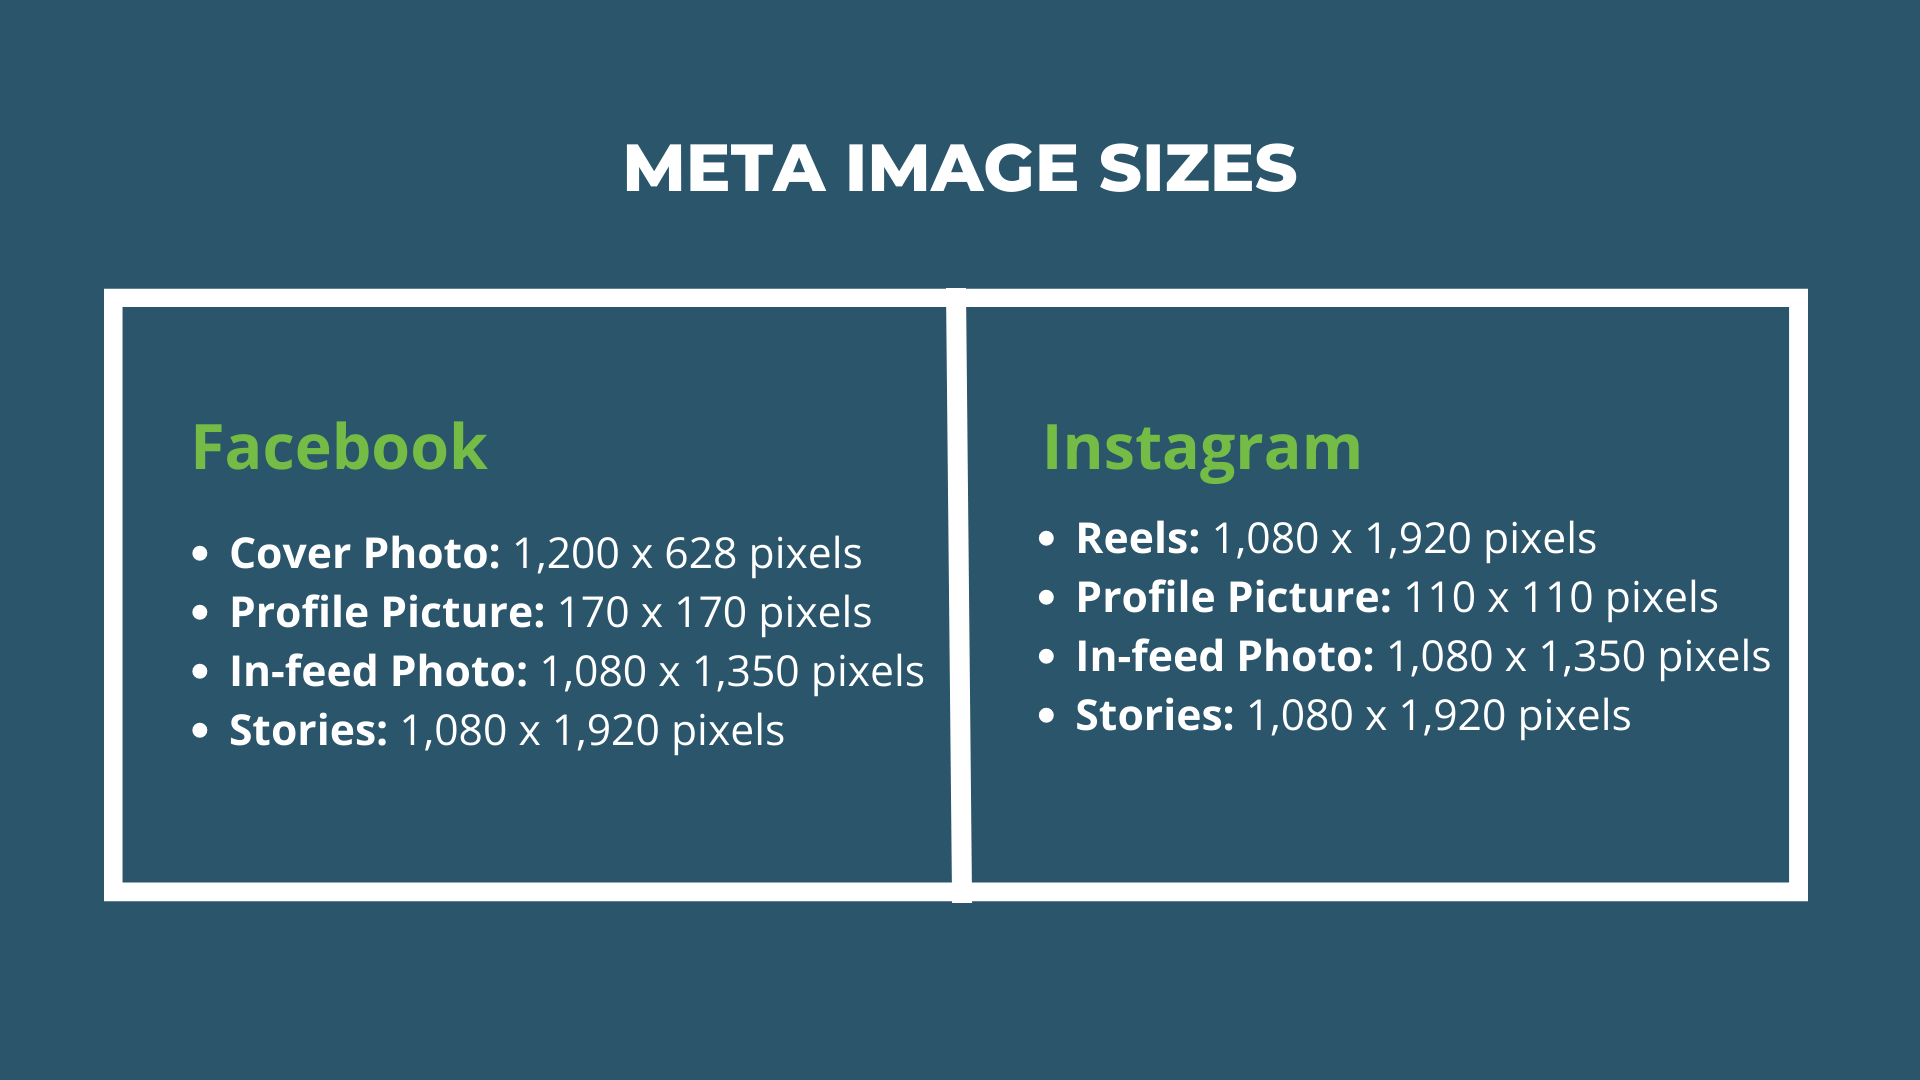 A navy chart with green and white text showing what sizes the different types of Facebook and Instagram images should be